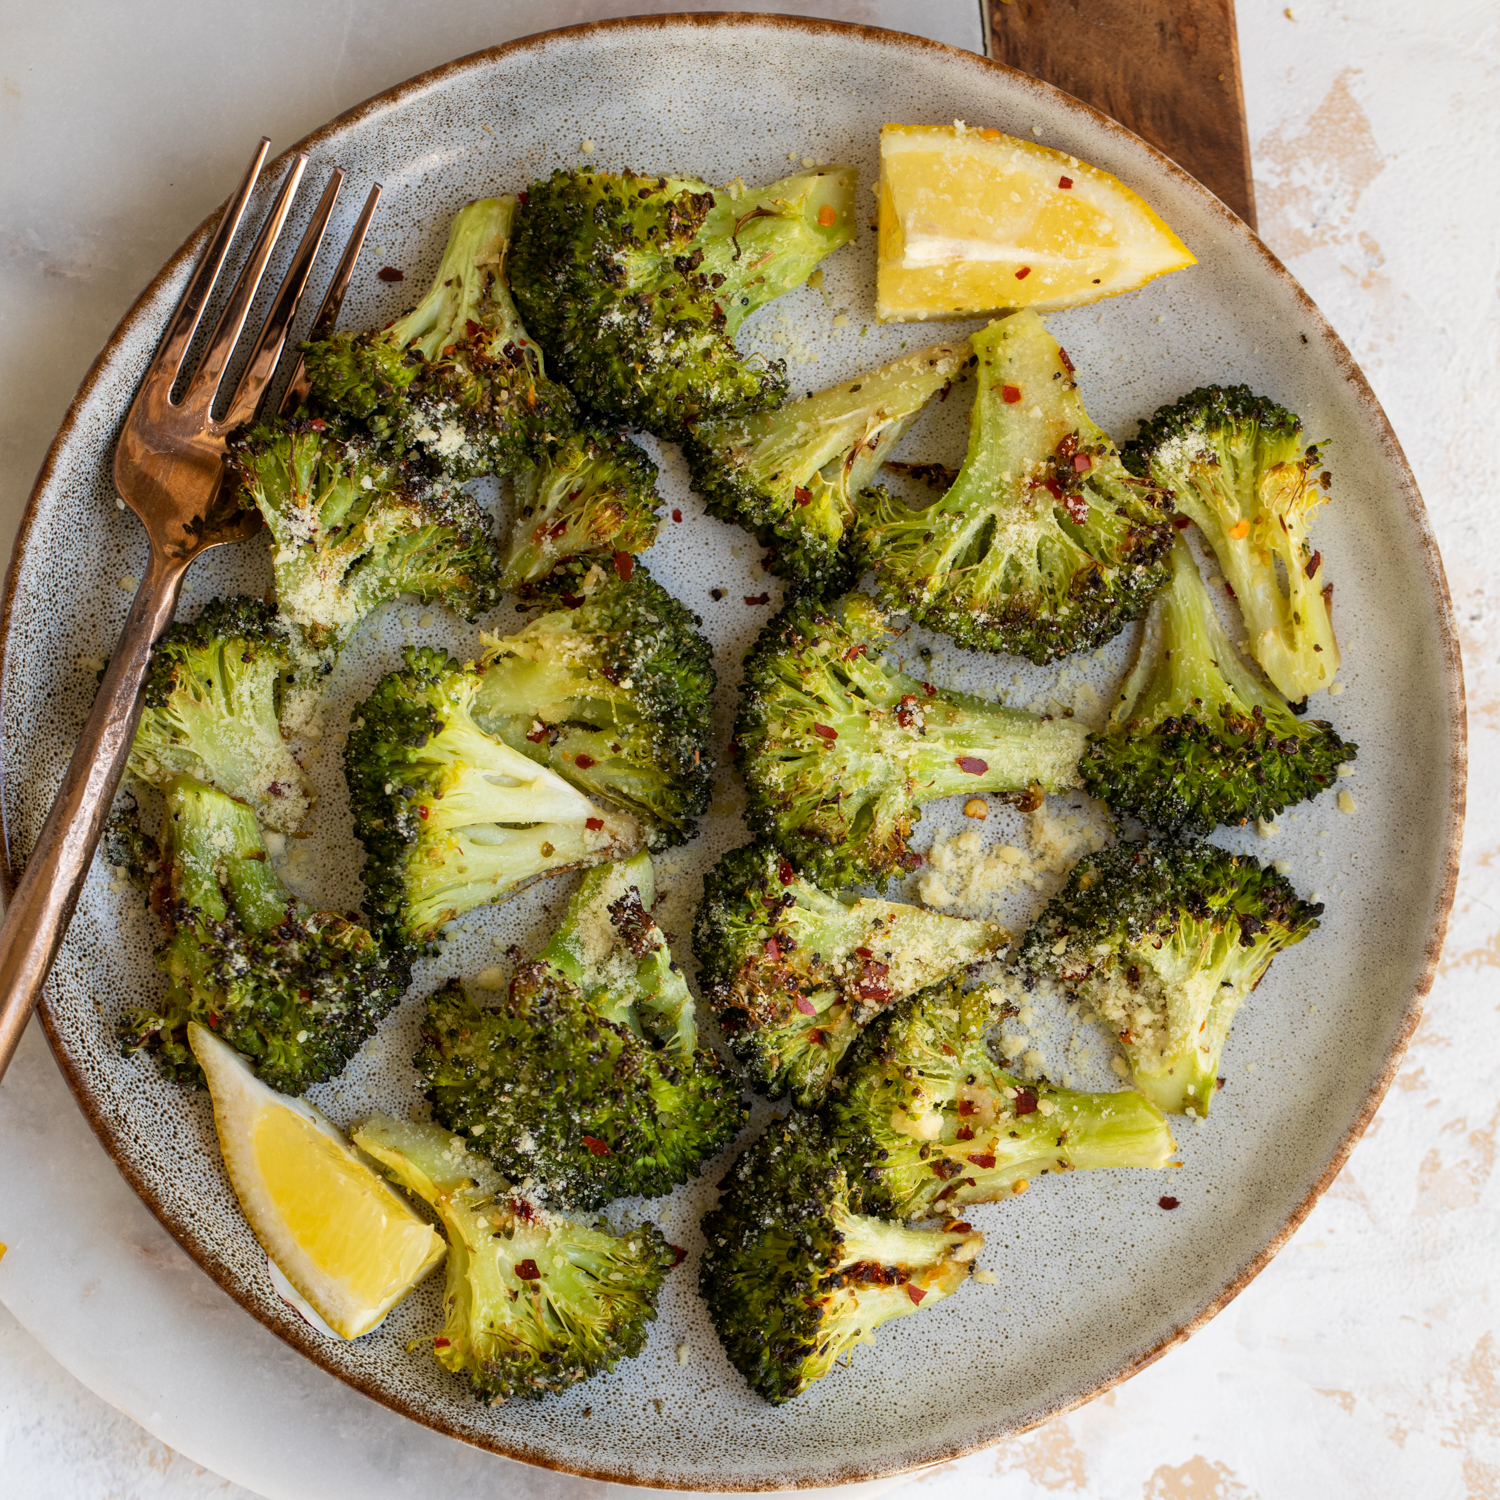 Cooked broccoli florets on a plate with lemon.